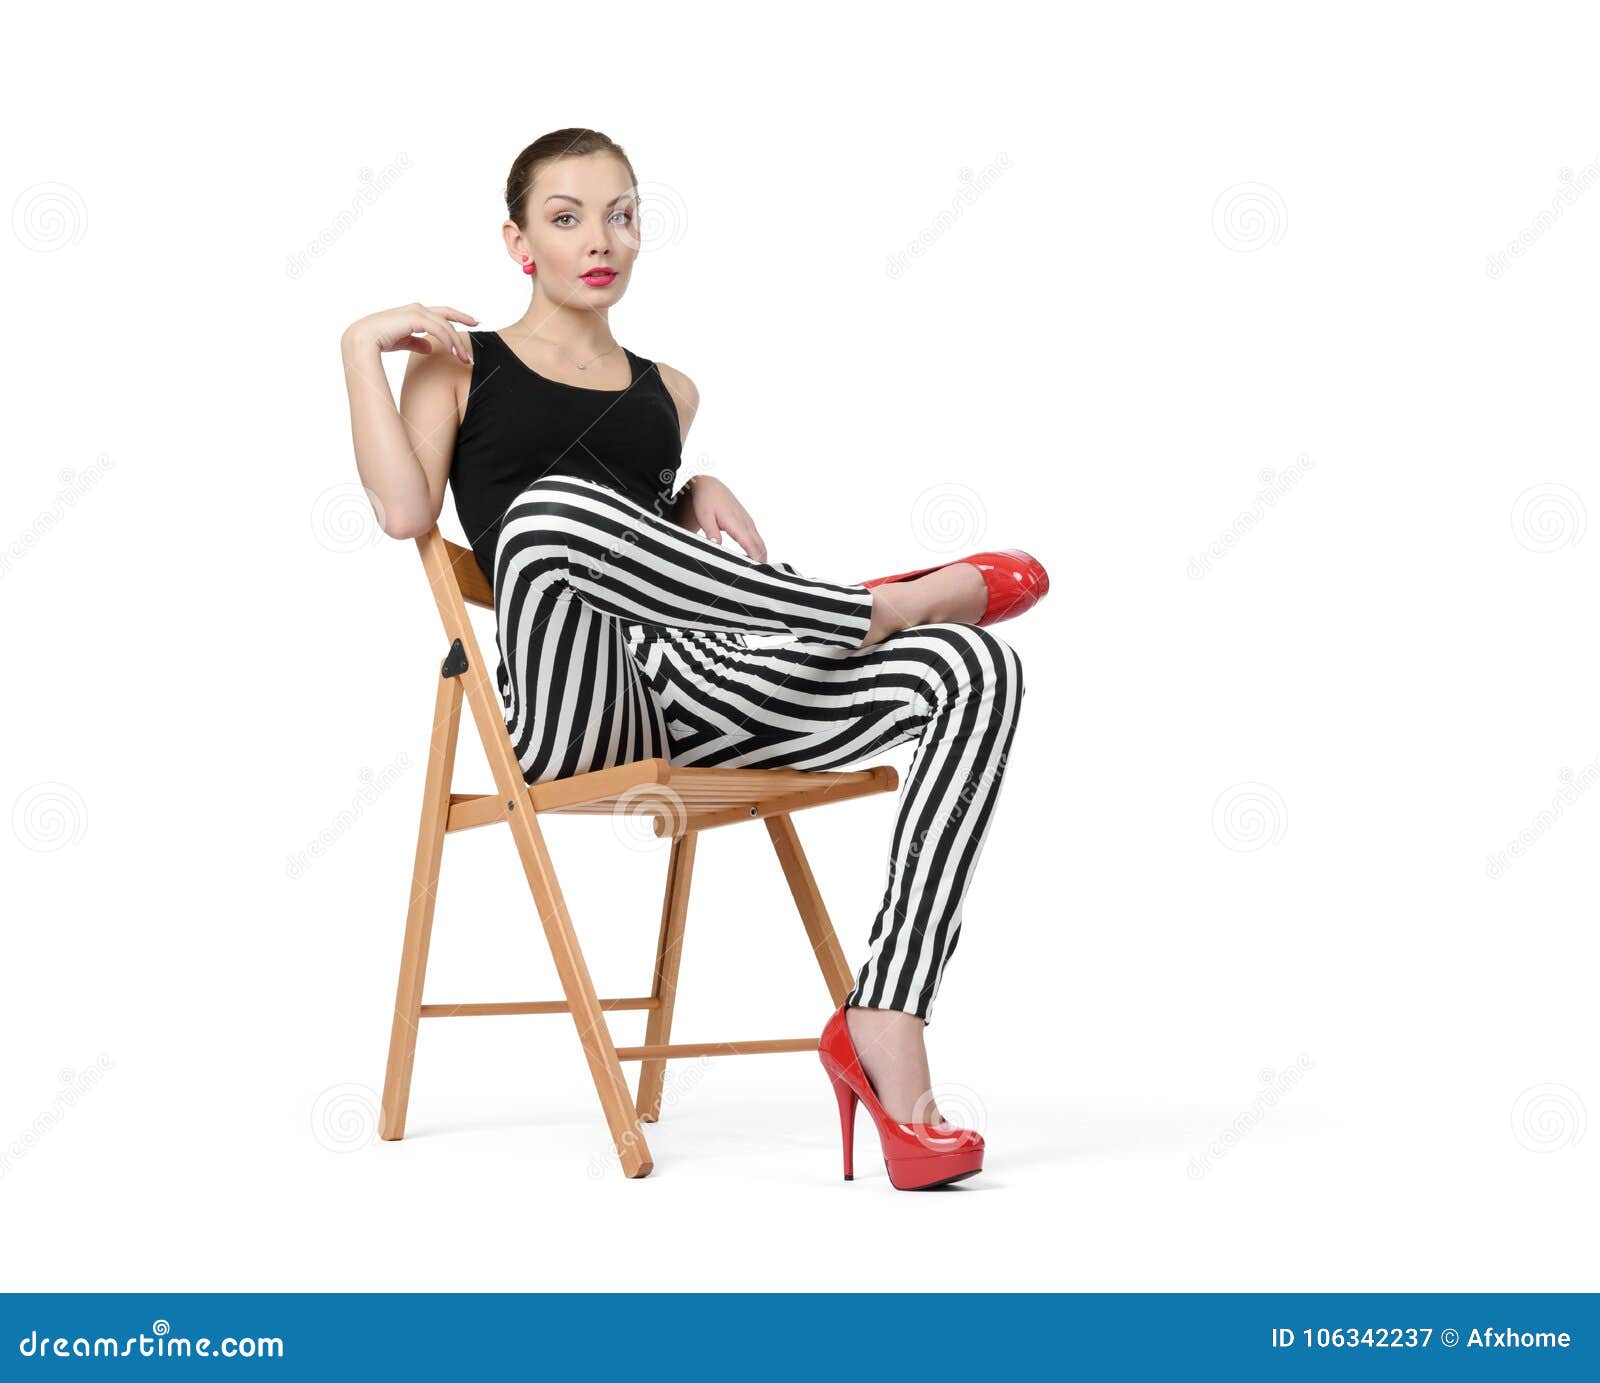 Nice Young Woman In Striped Pants And Red Heels Sitting In Chair